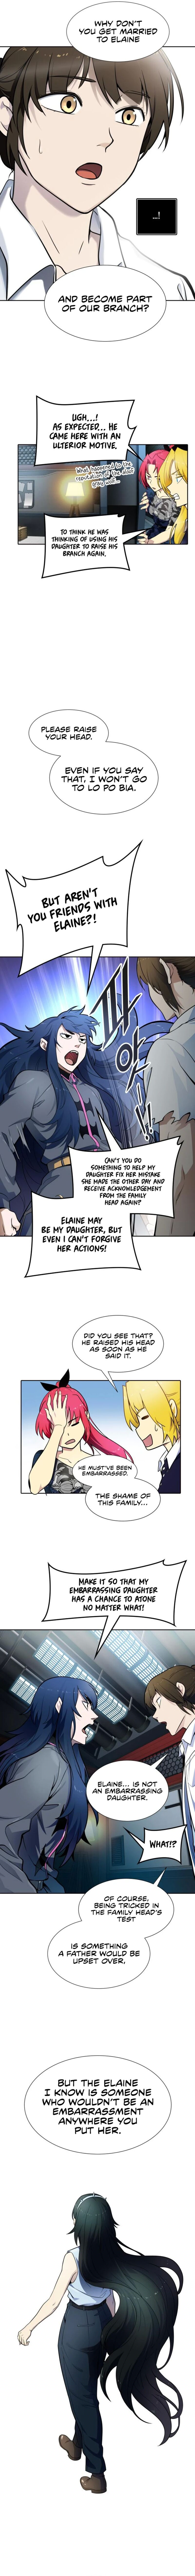 Tower Of God 577 8